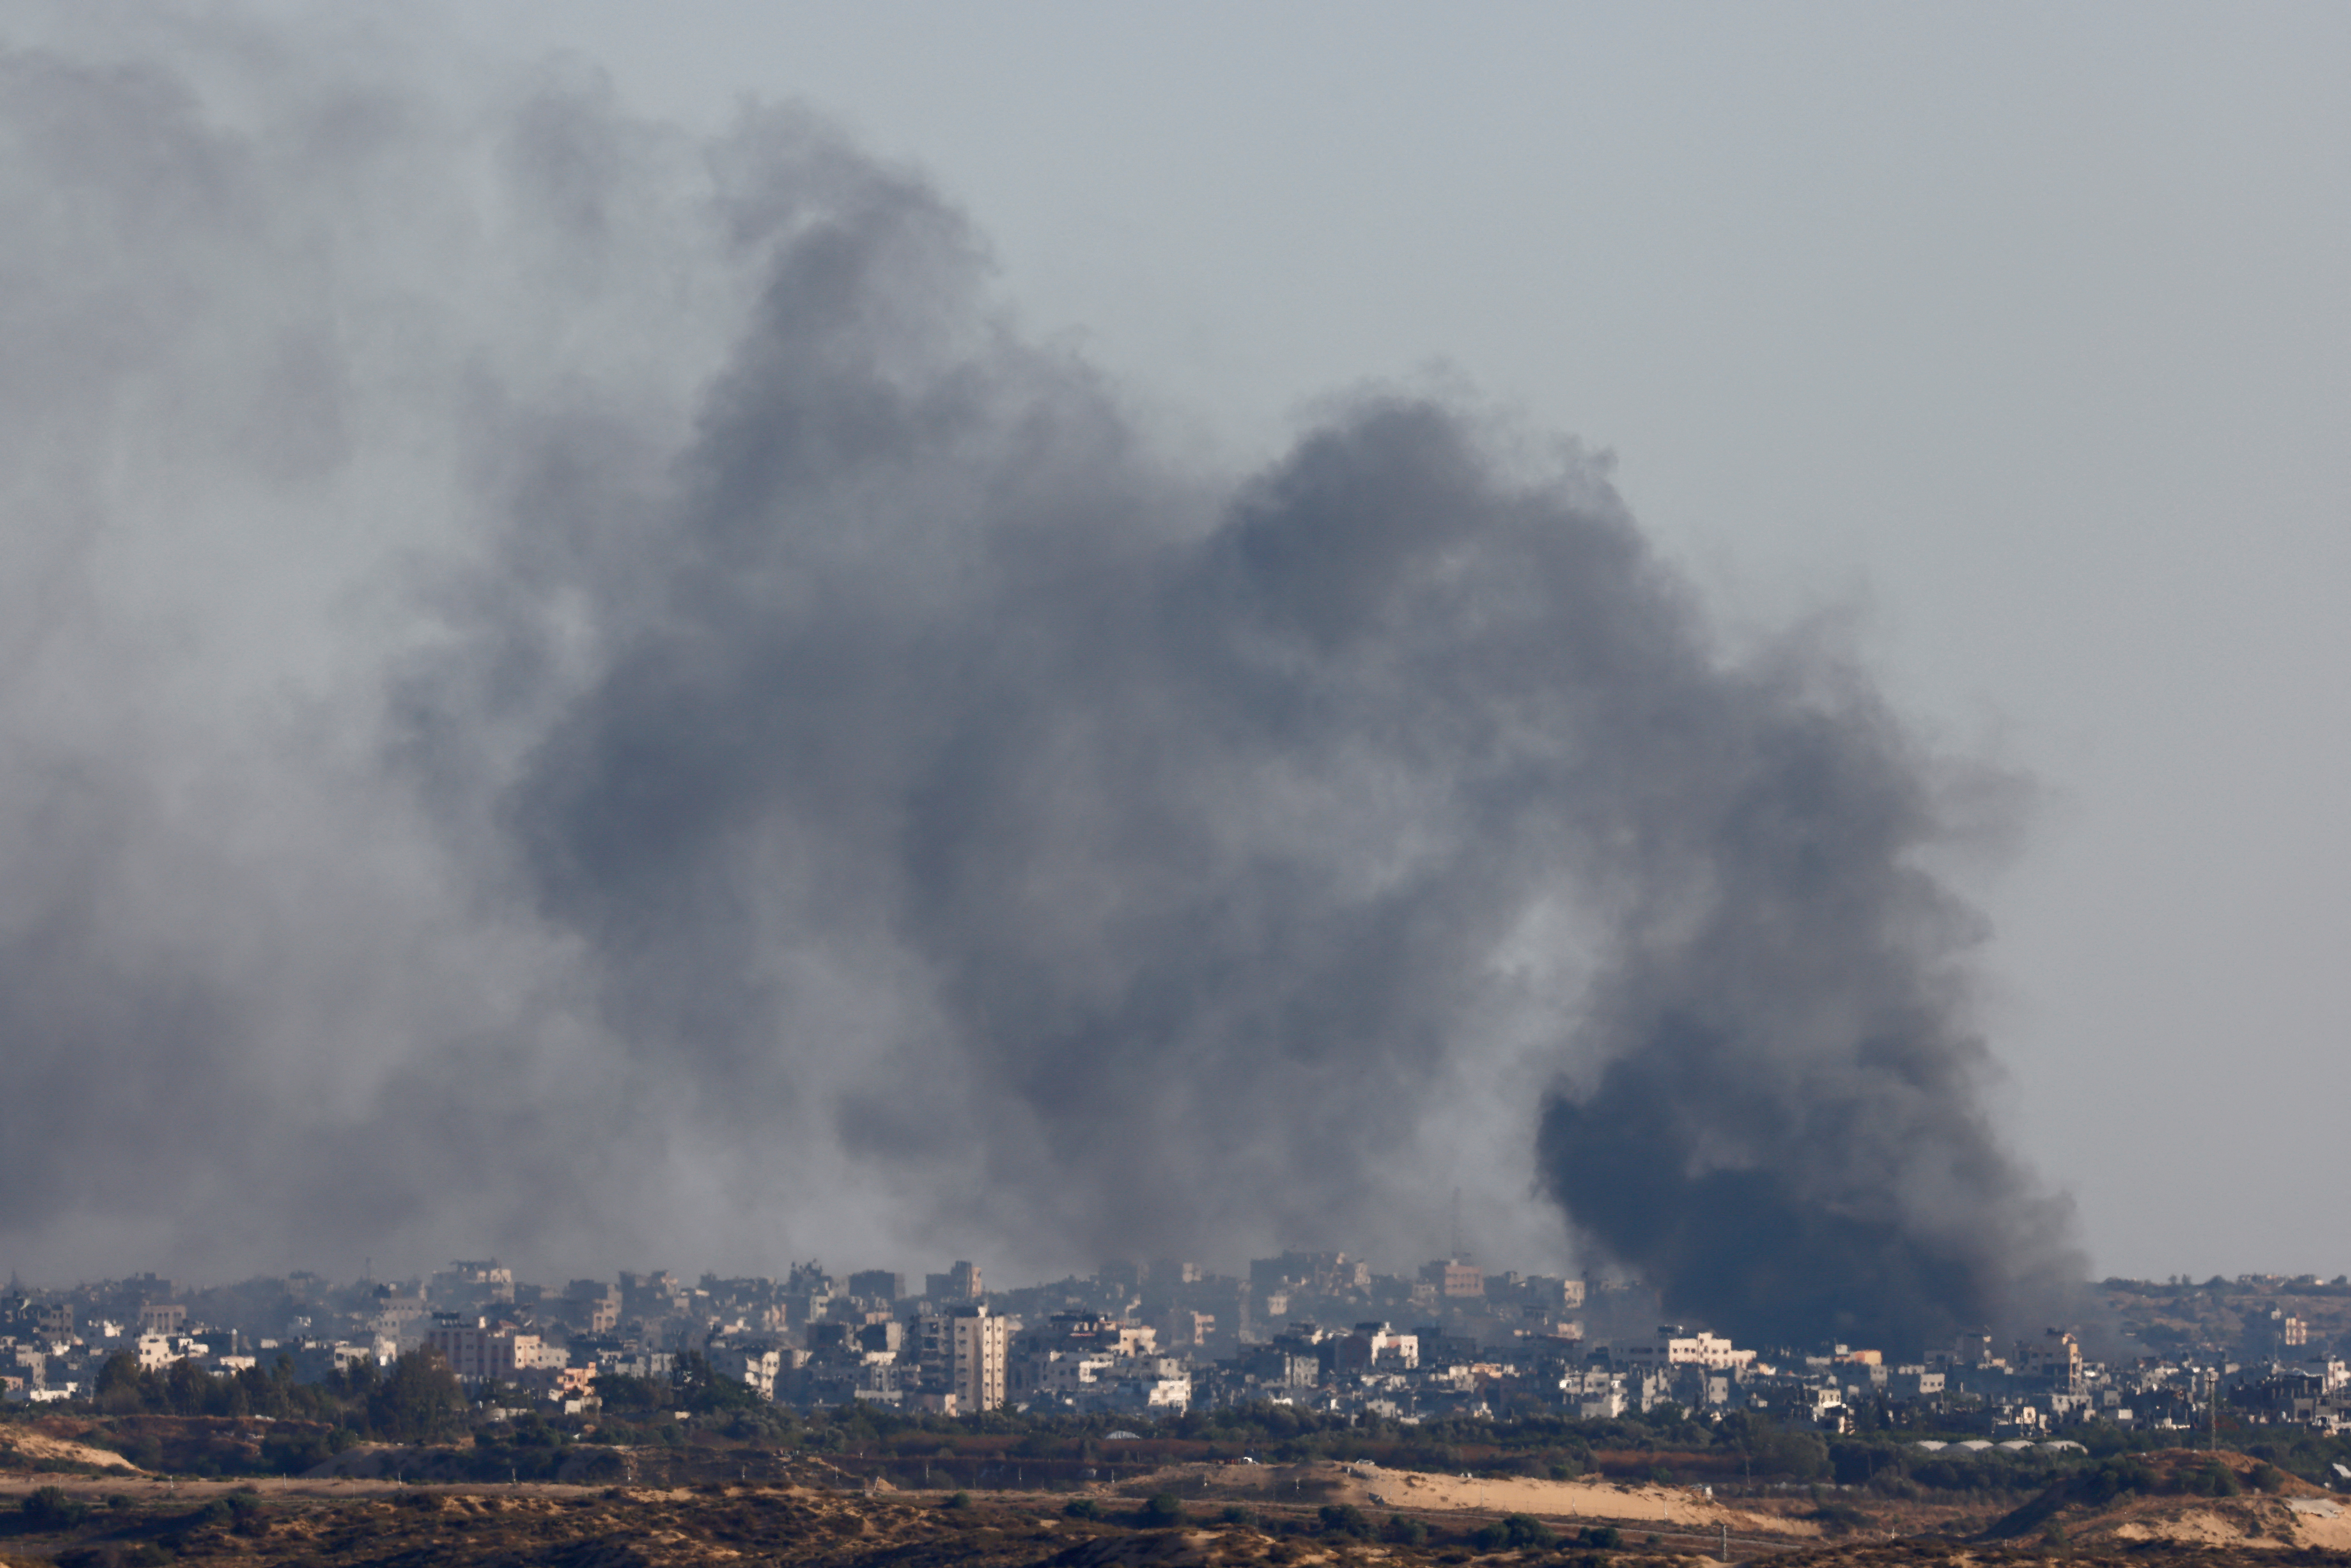 Smoke rises following an explosion in Gaza, amid the ongoing conflict between Israel and the Palestinian Islamist group Hamas, near the Israel-Gaza border, as seen from Israel